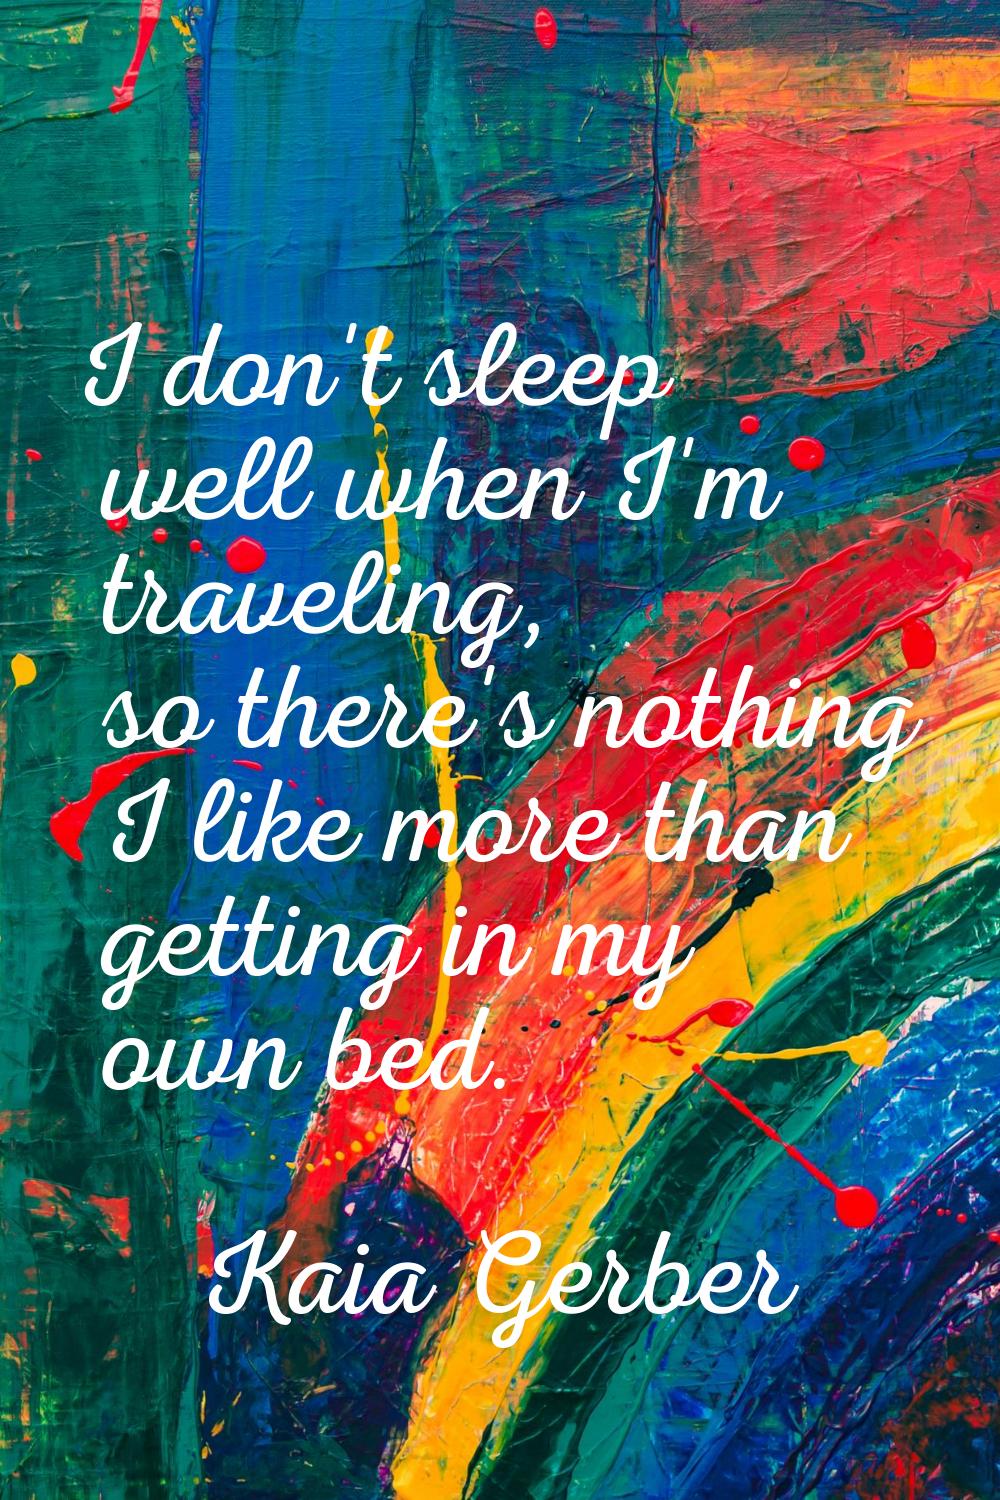 I don't sleep well when I'm traveling, so there's nothing I like more than getting in my own bed.